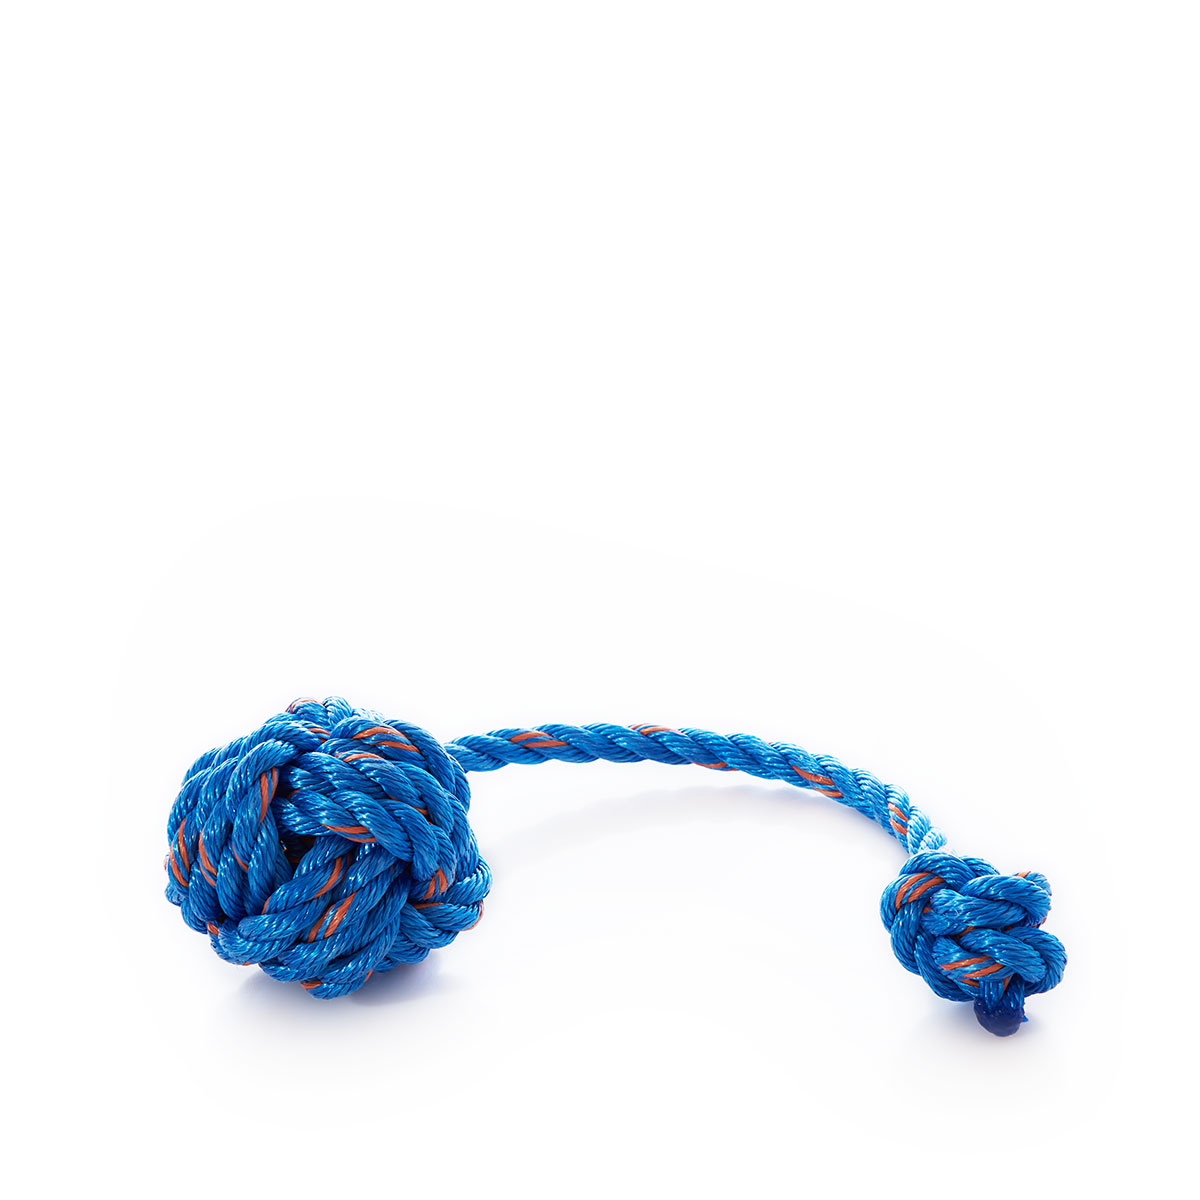 handmade rope dog toy with monkeys fist large knot on one end and small knot on other end